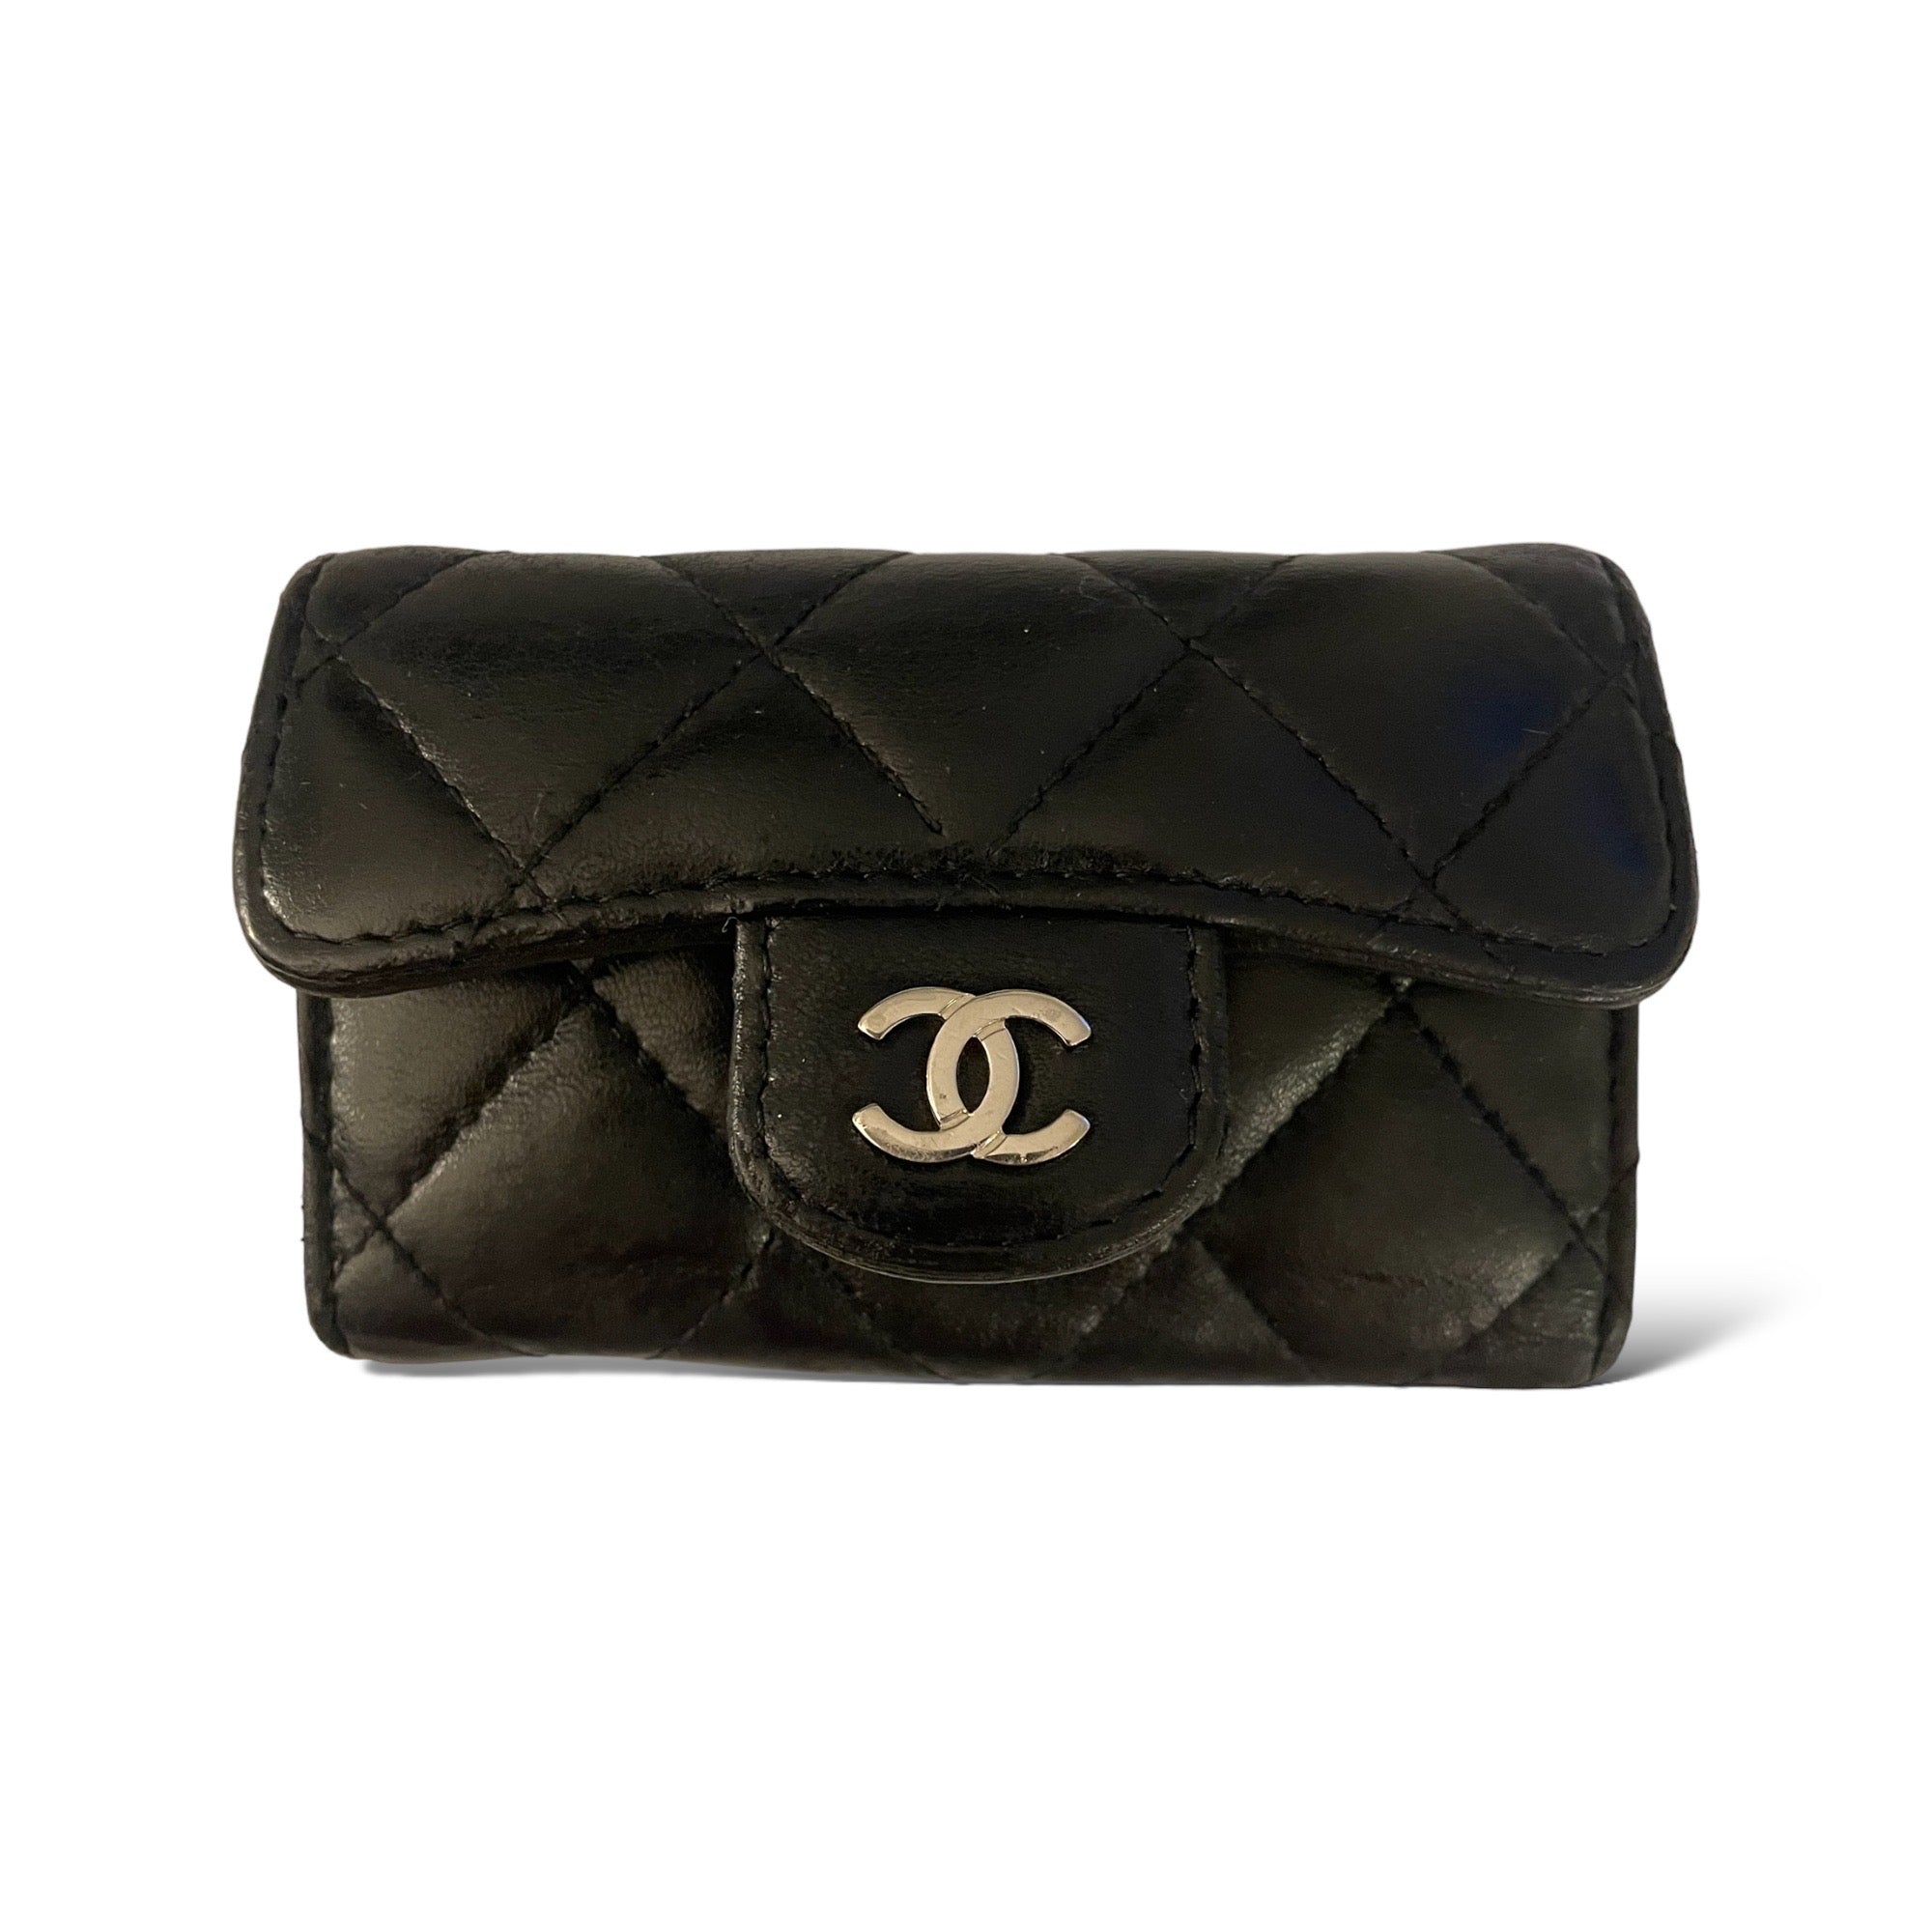 CHANEL Vintage Key & Card Holder in Quilted Black Leather